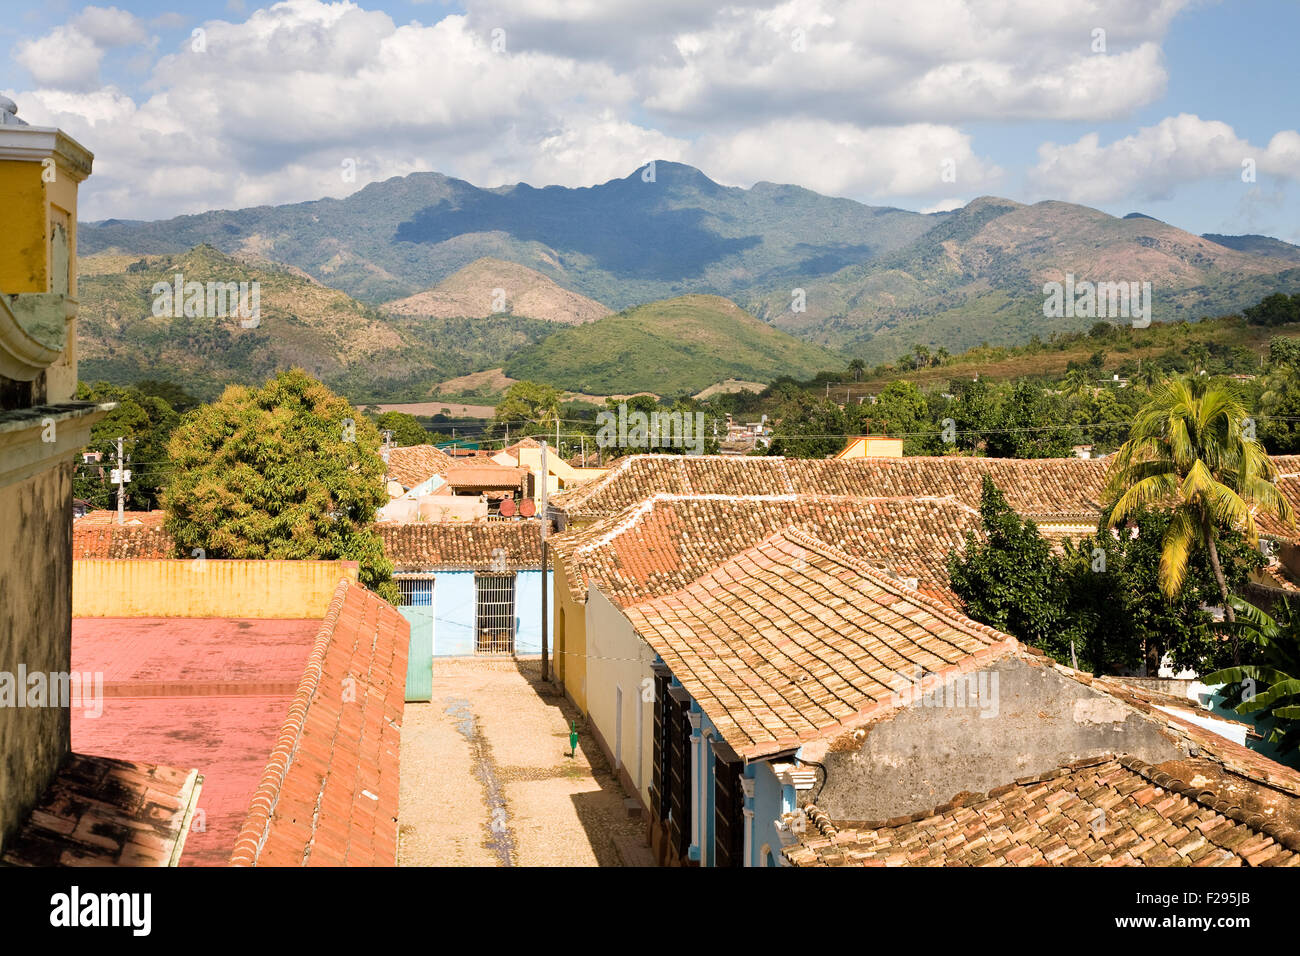 The colonial city of Trinidad and the surrounding mountains in central Cuba Stock Photo